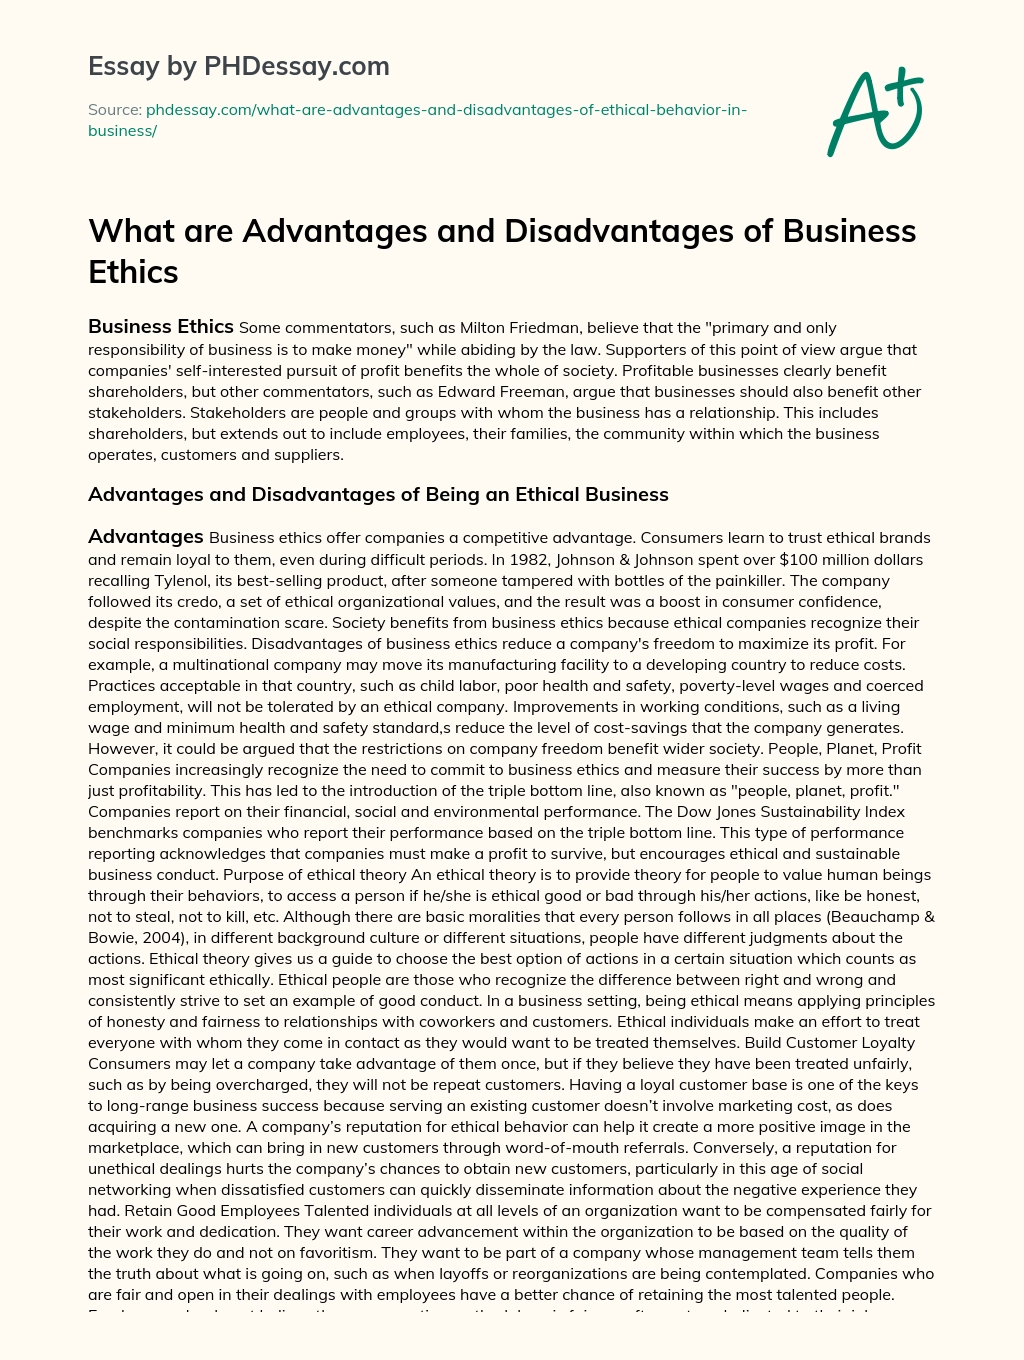 What are Advantages and Disadvantages of Business Ethics essay